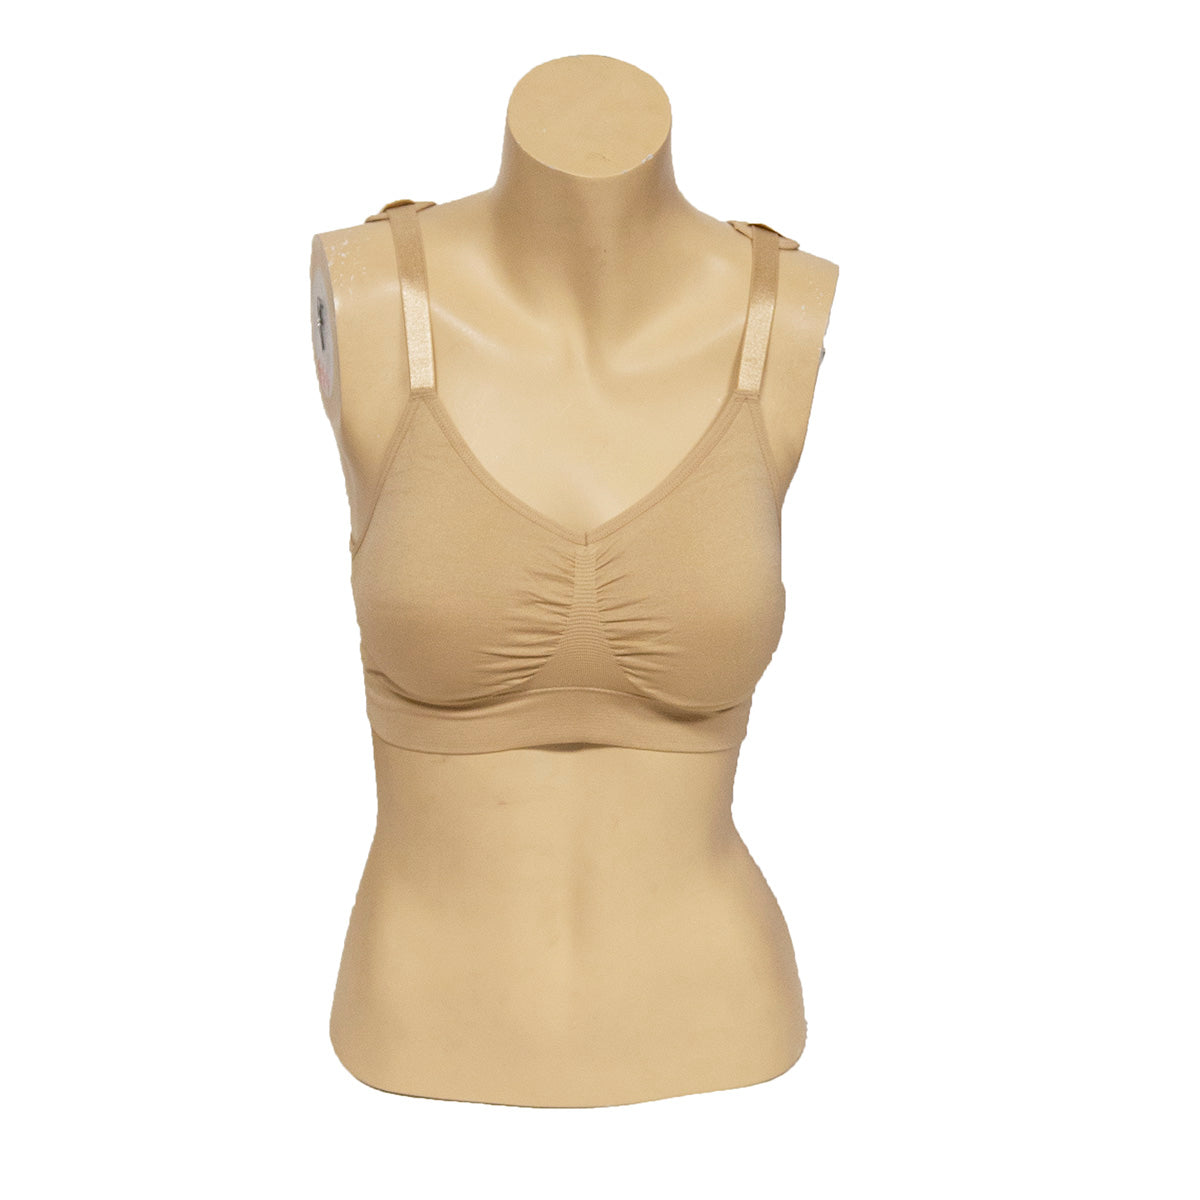 Genie Bra Women's Dream Bra Seamless Bust Support w/ Convertible Straps  Choice of Color/Size 